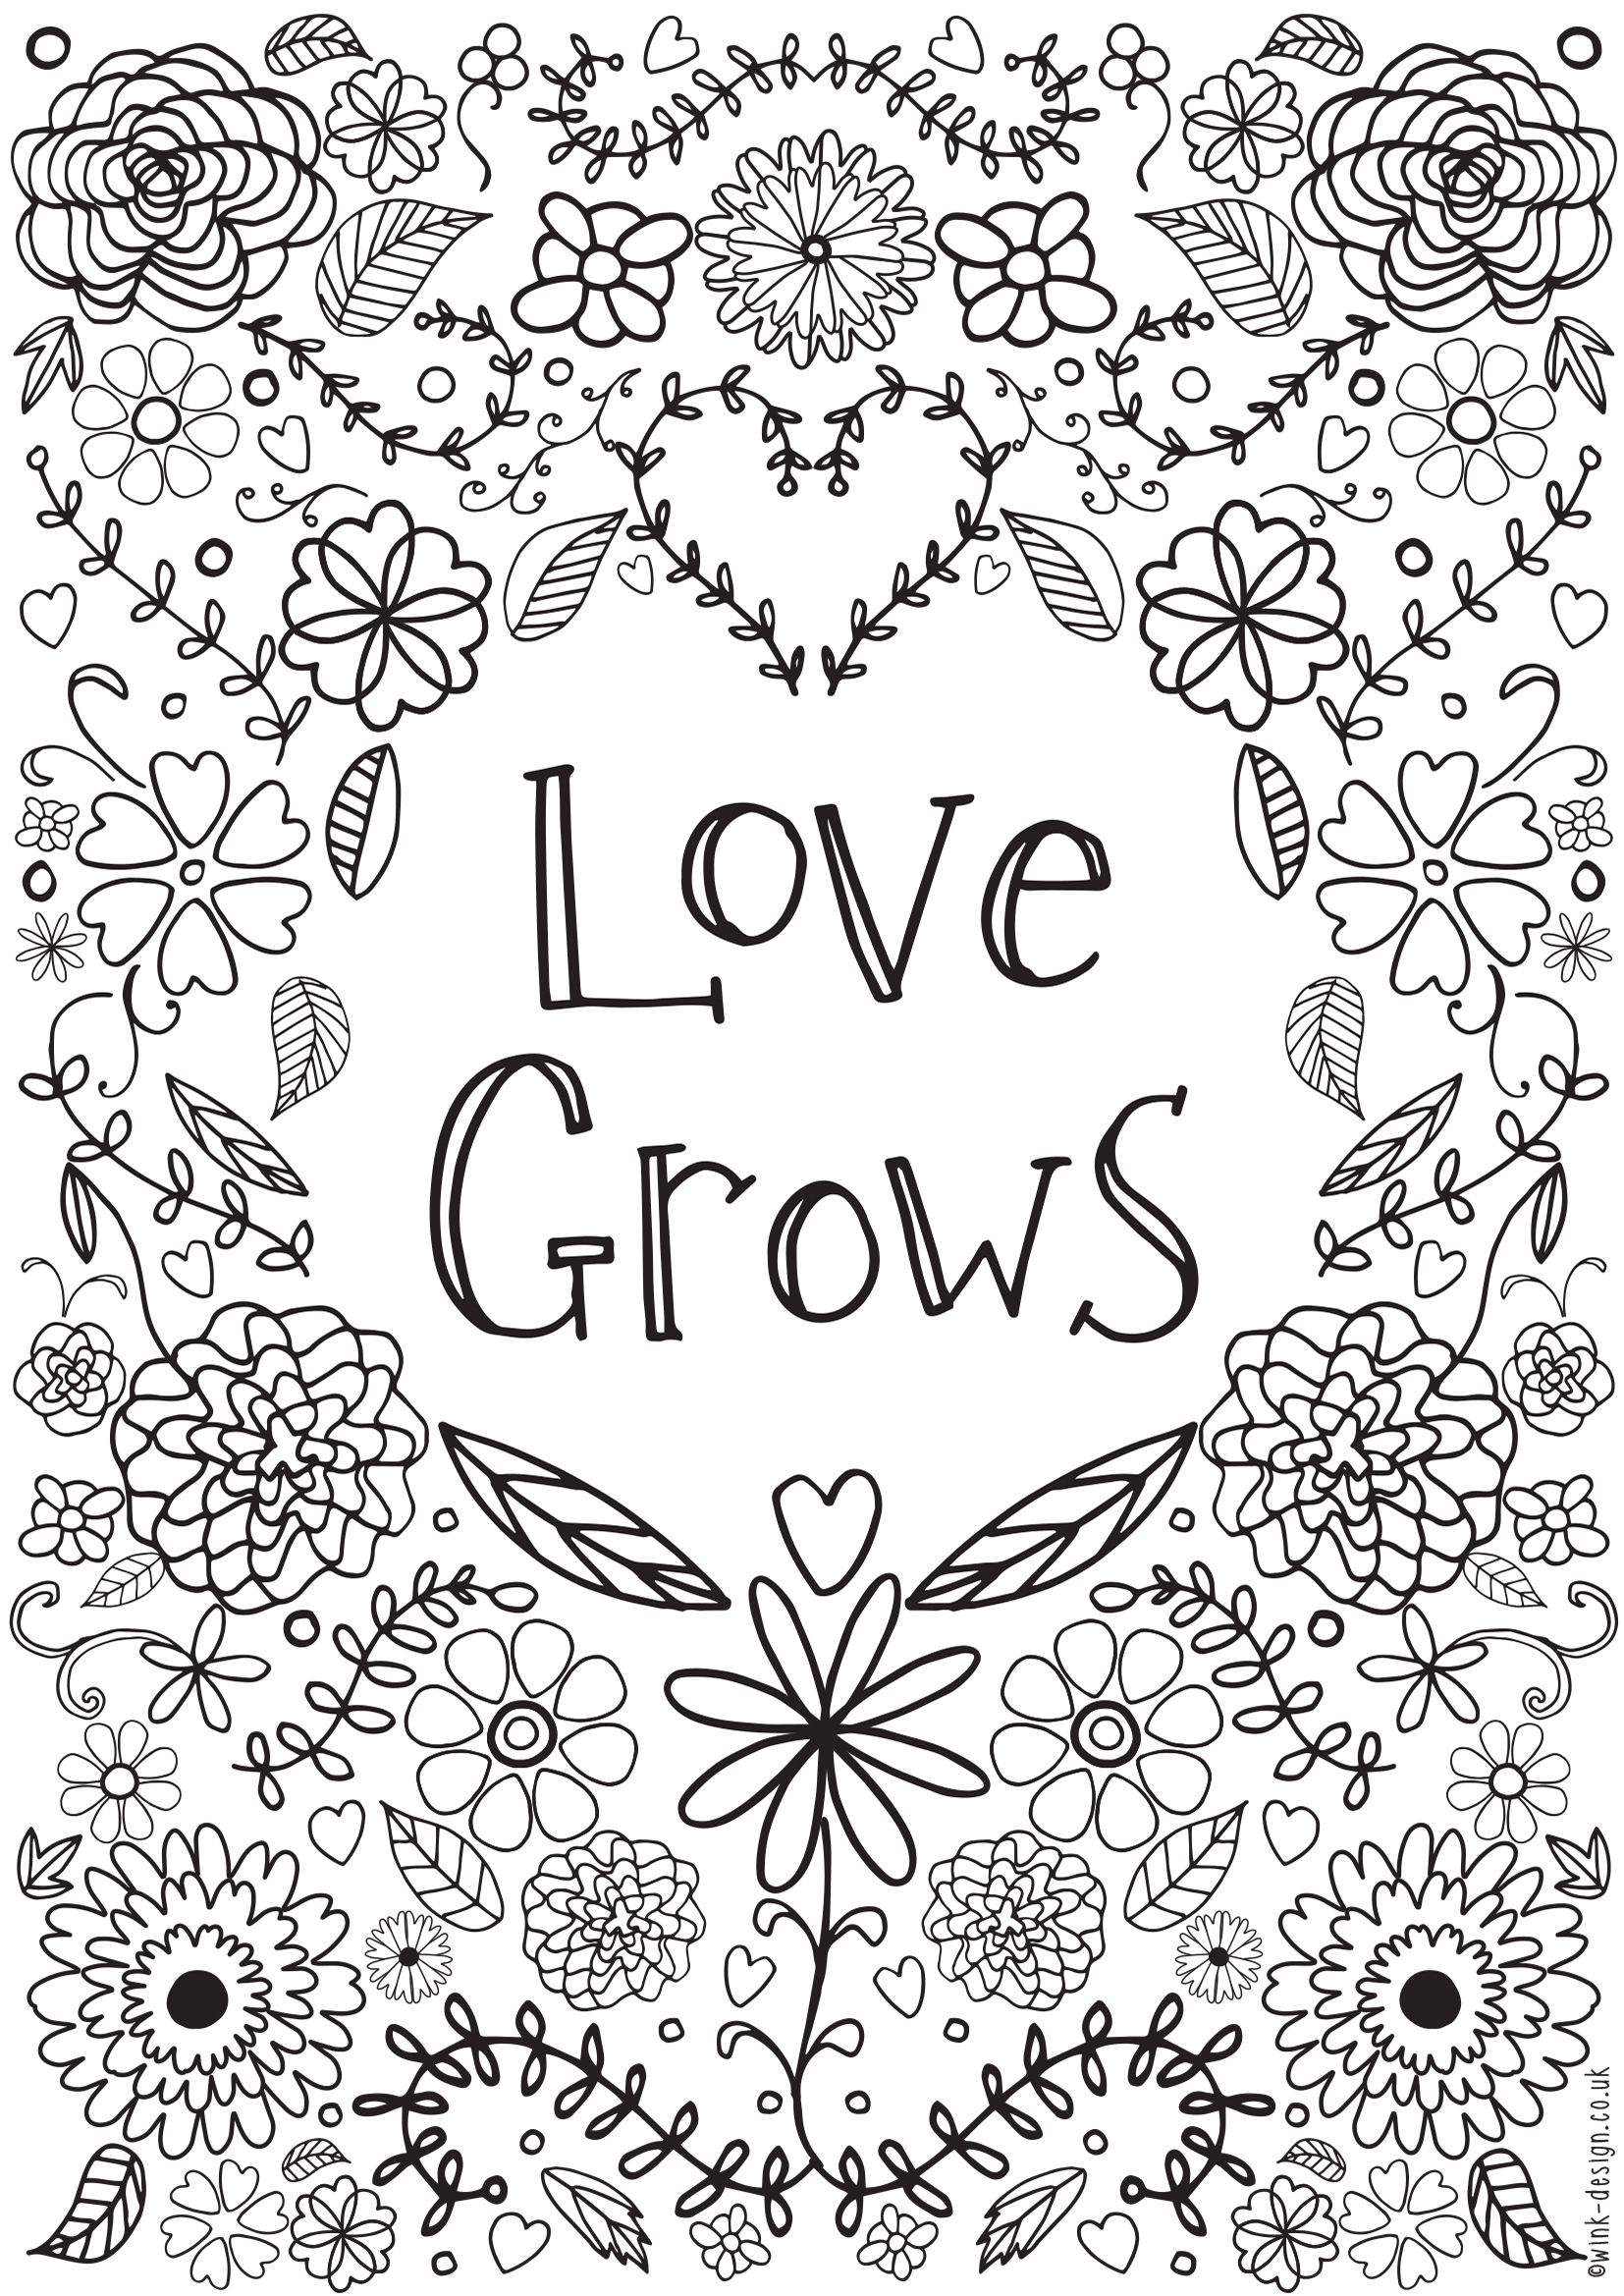 Free Printable Adult Colouring Pages - Inspirational Quotes For The - Free Printable Quote Coloring Pages For Adults